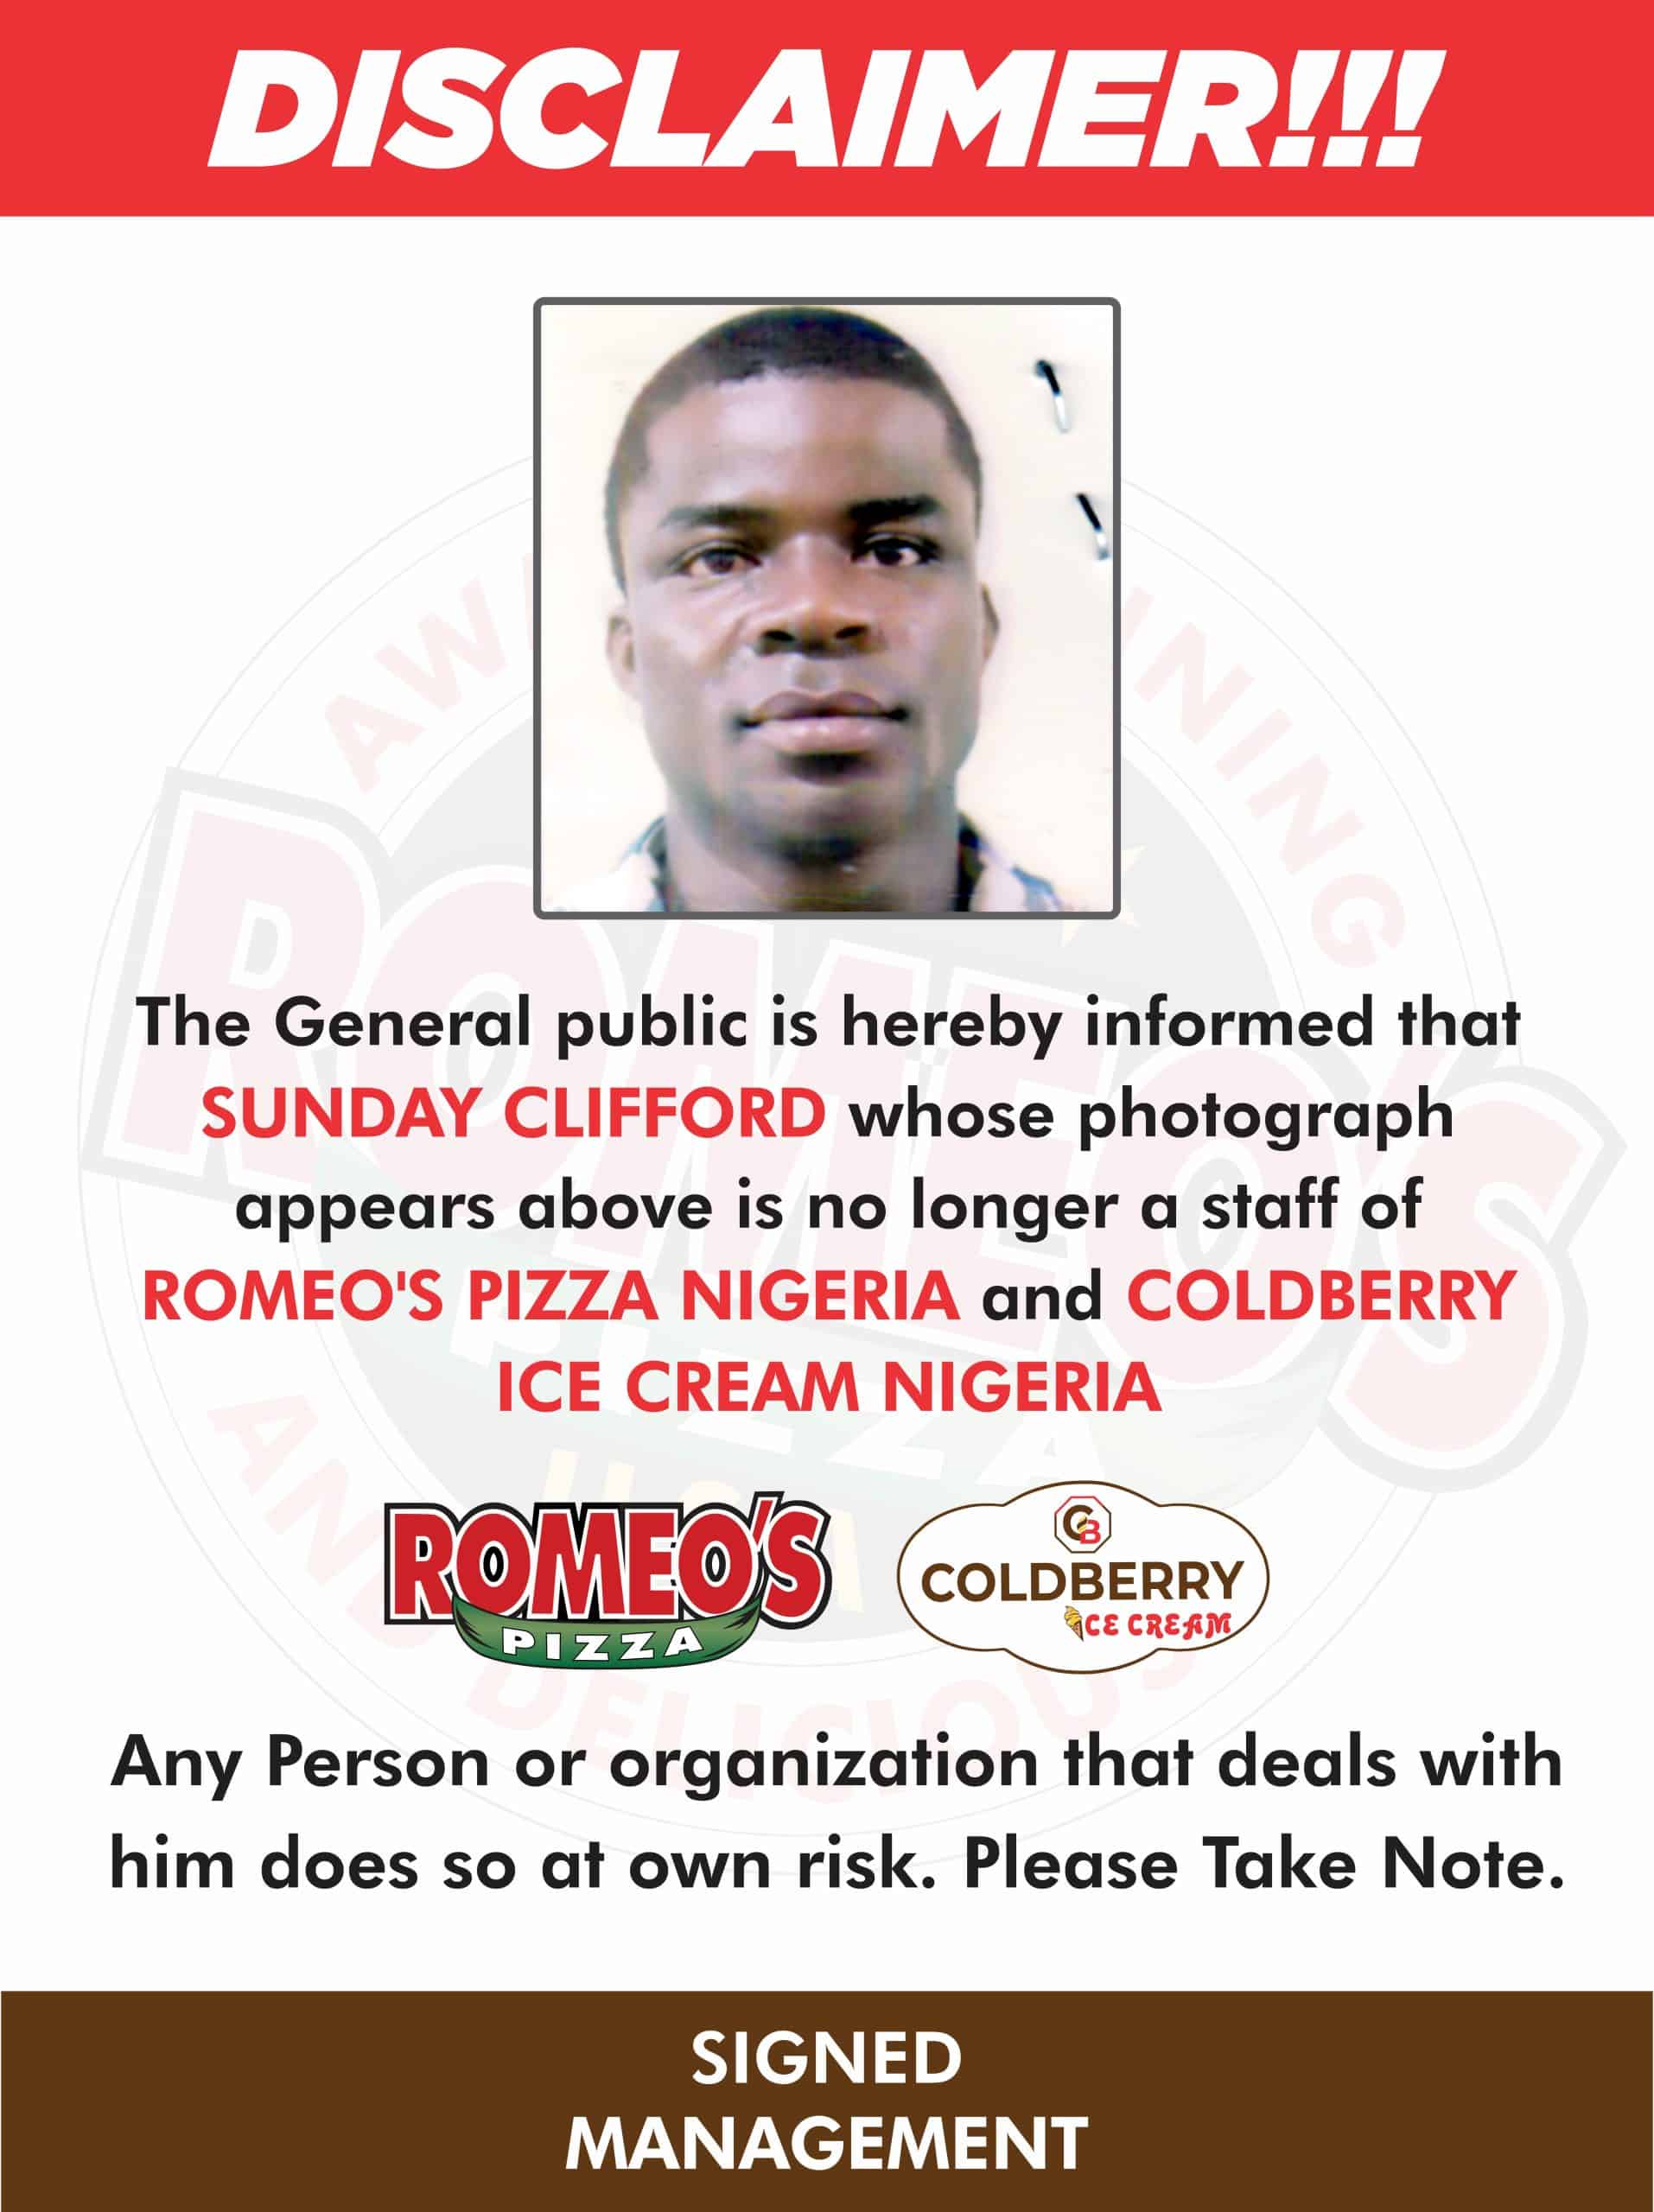 Romeo’s Pizza NG Staff Disclaimer For Sunday Clifford